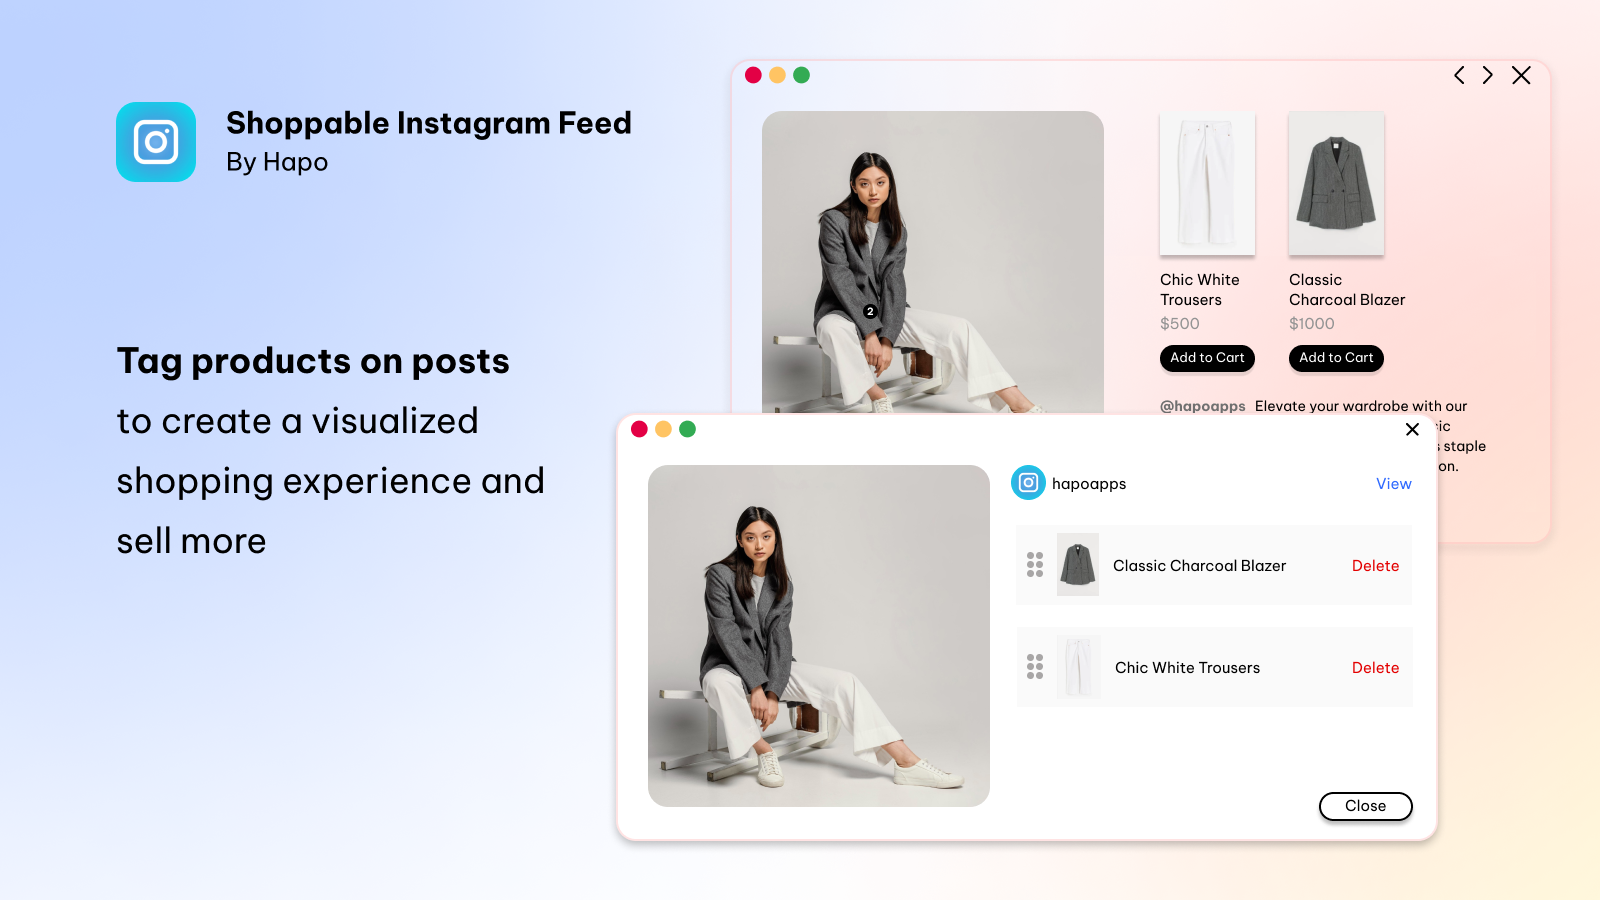 Tag products on posts to create a visualized shopping experience